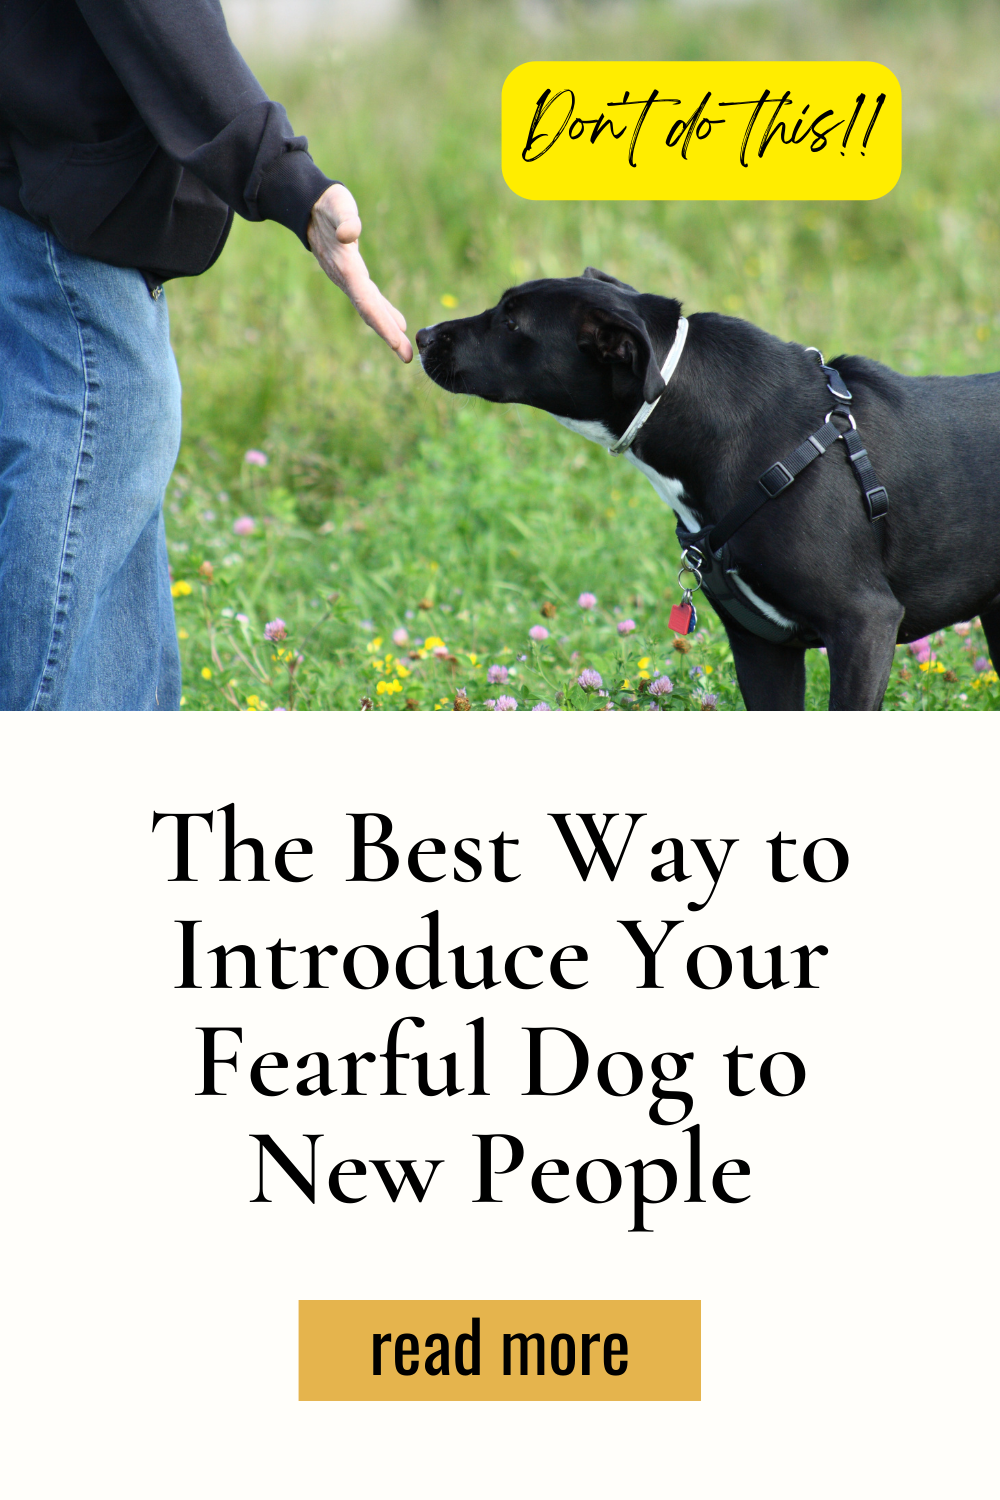 Introduce dog to new people